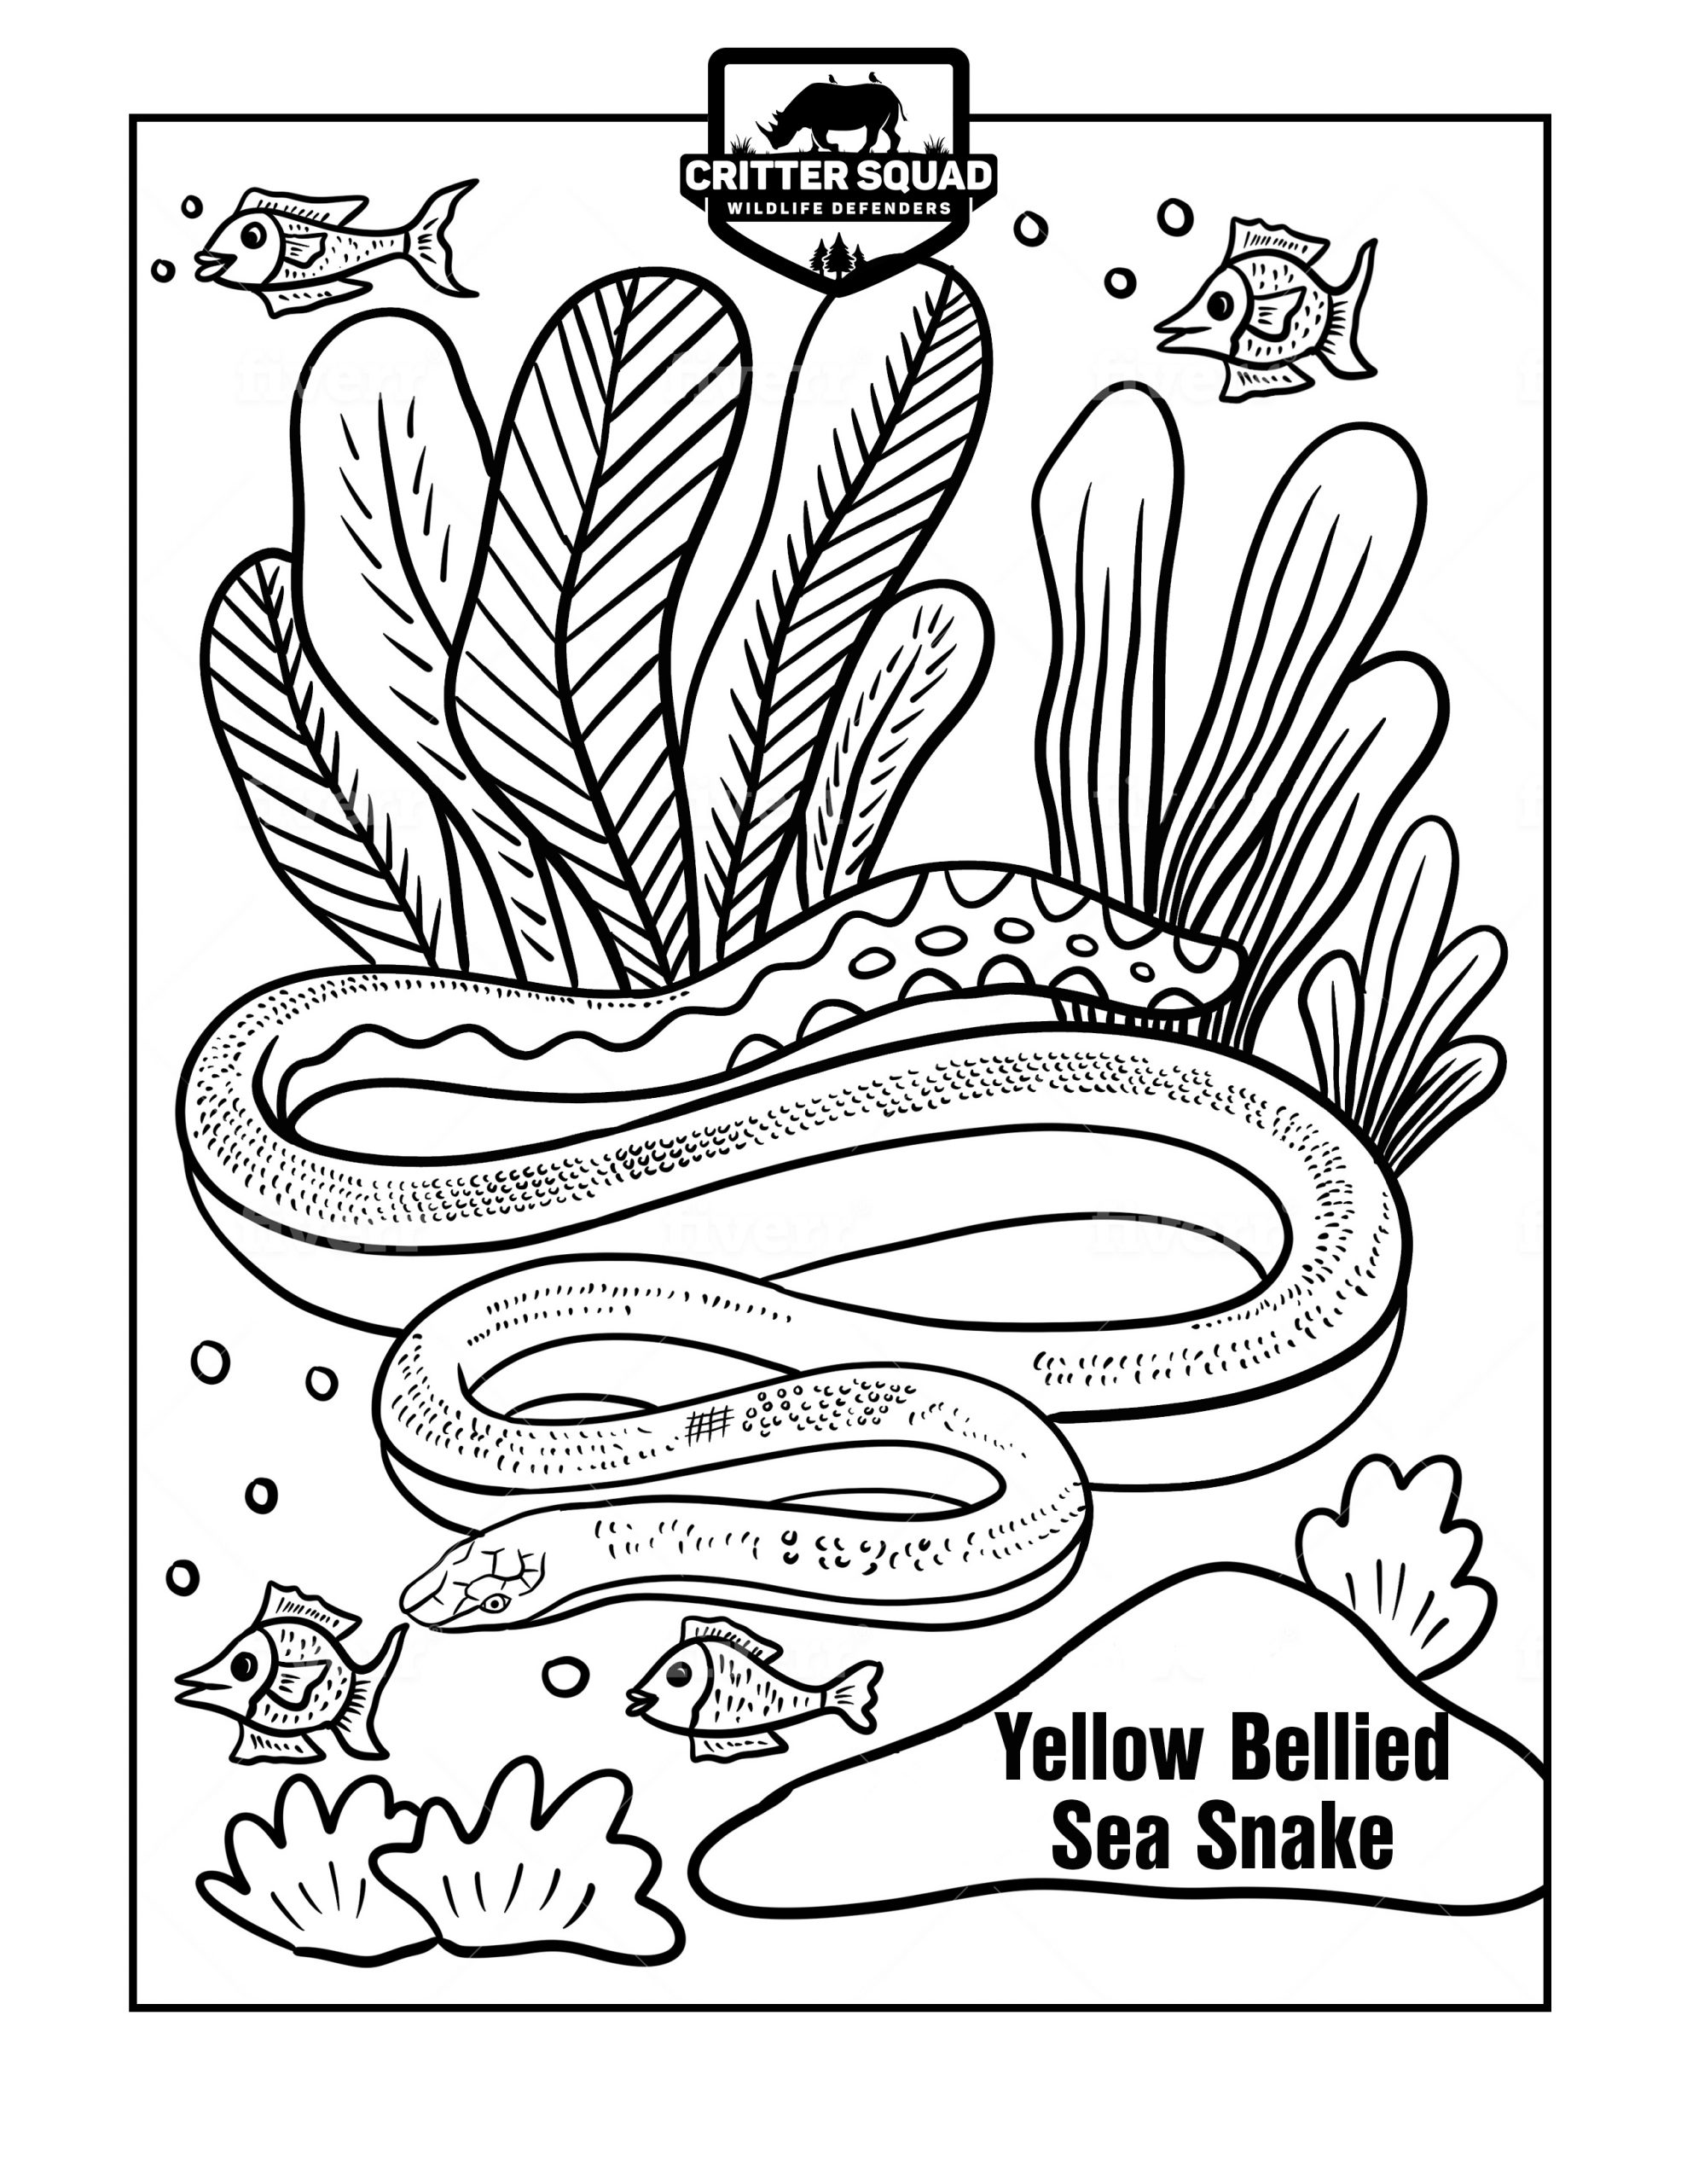 Yellow bellied sea snake coloring page